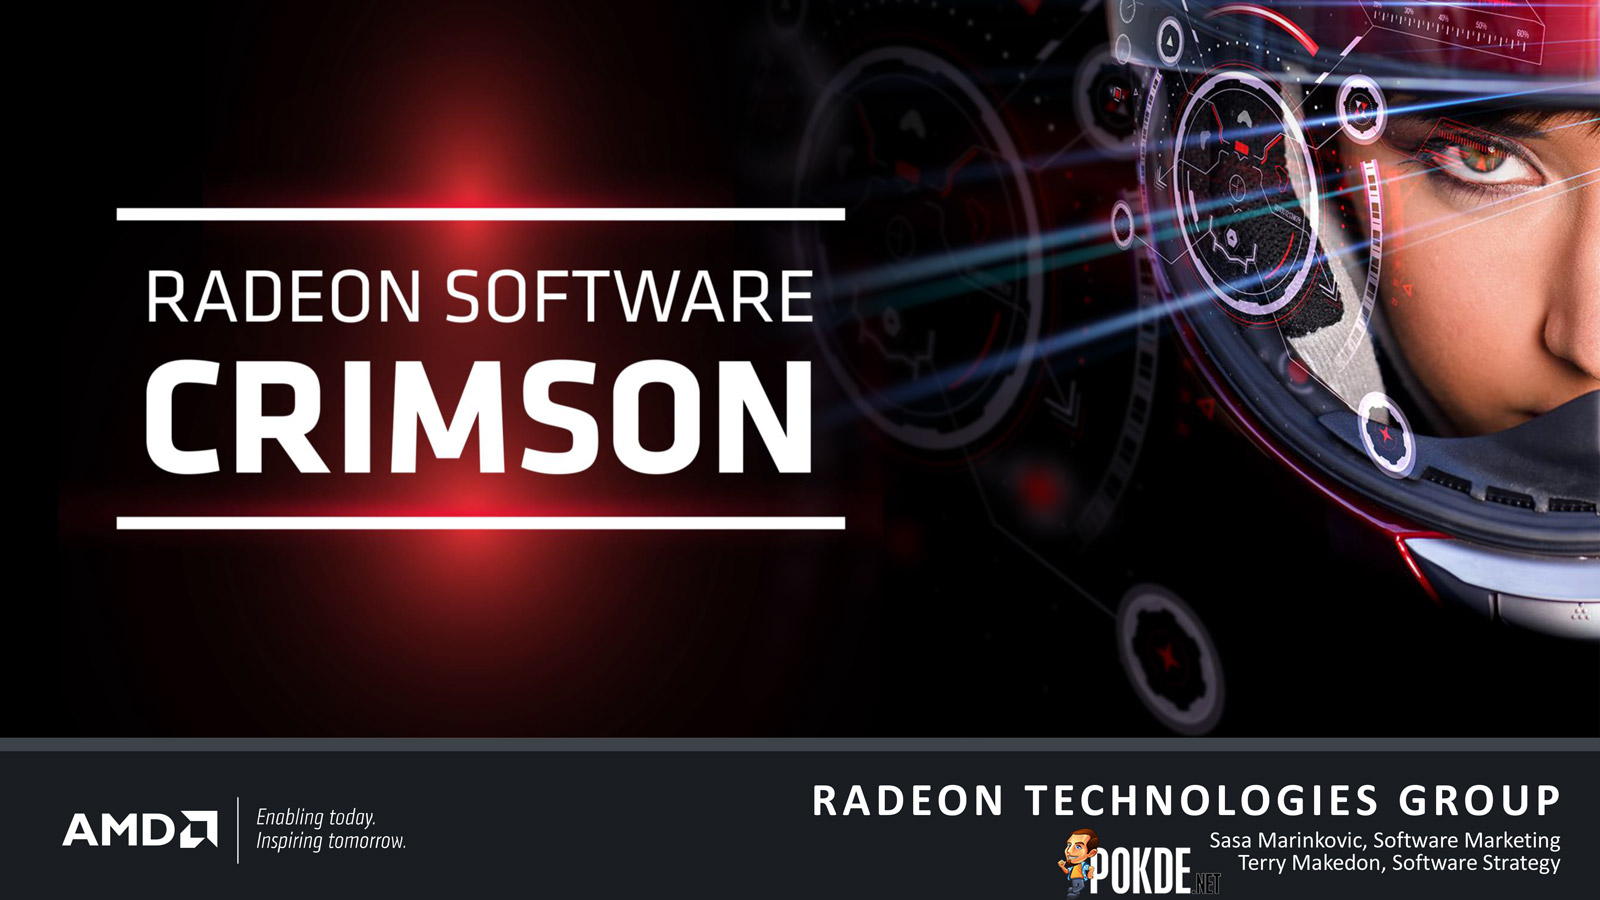 Radeon Technologies Group launched their first product today — Radeon Software Crimson Edition 37